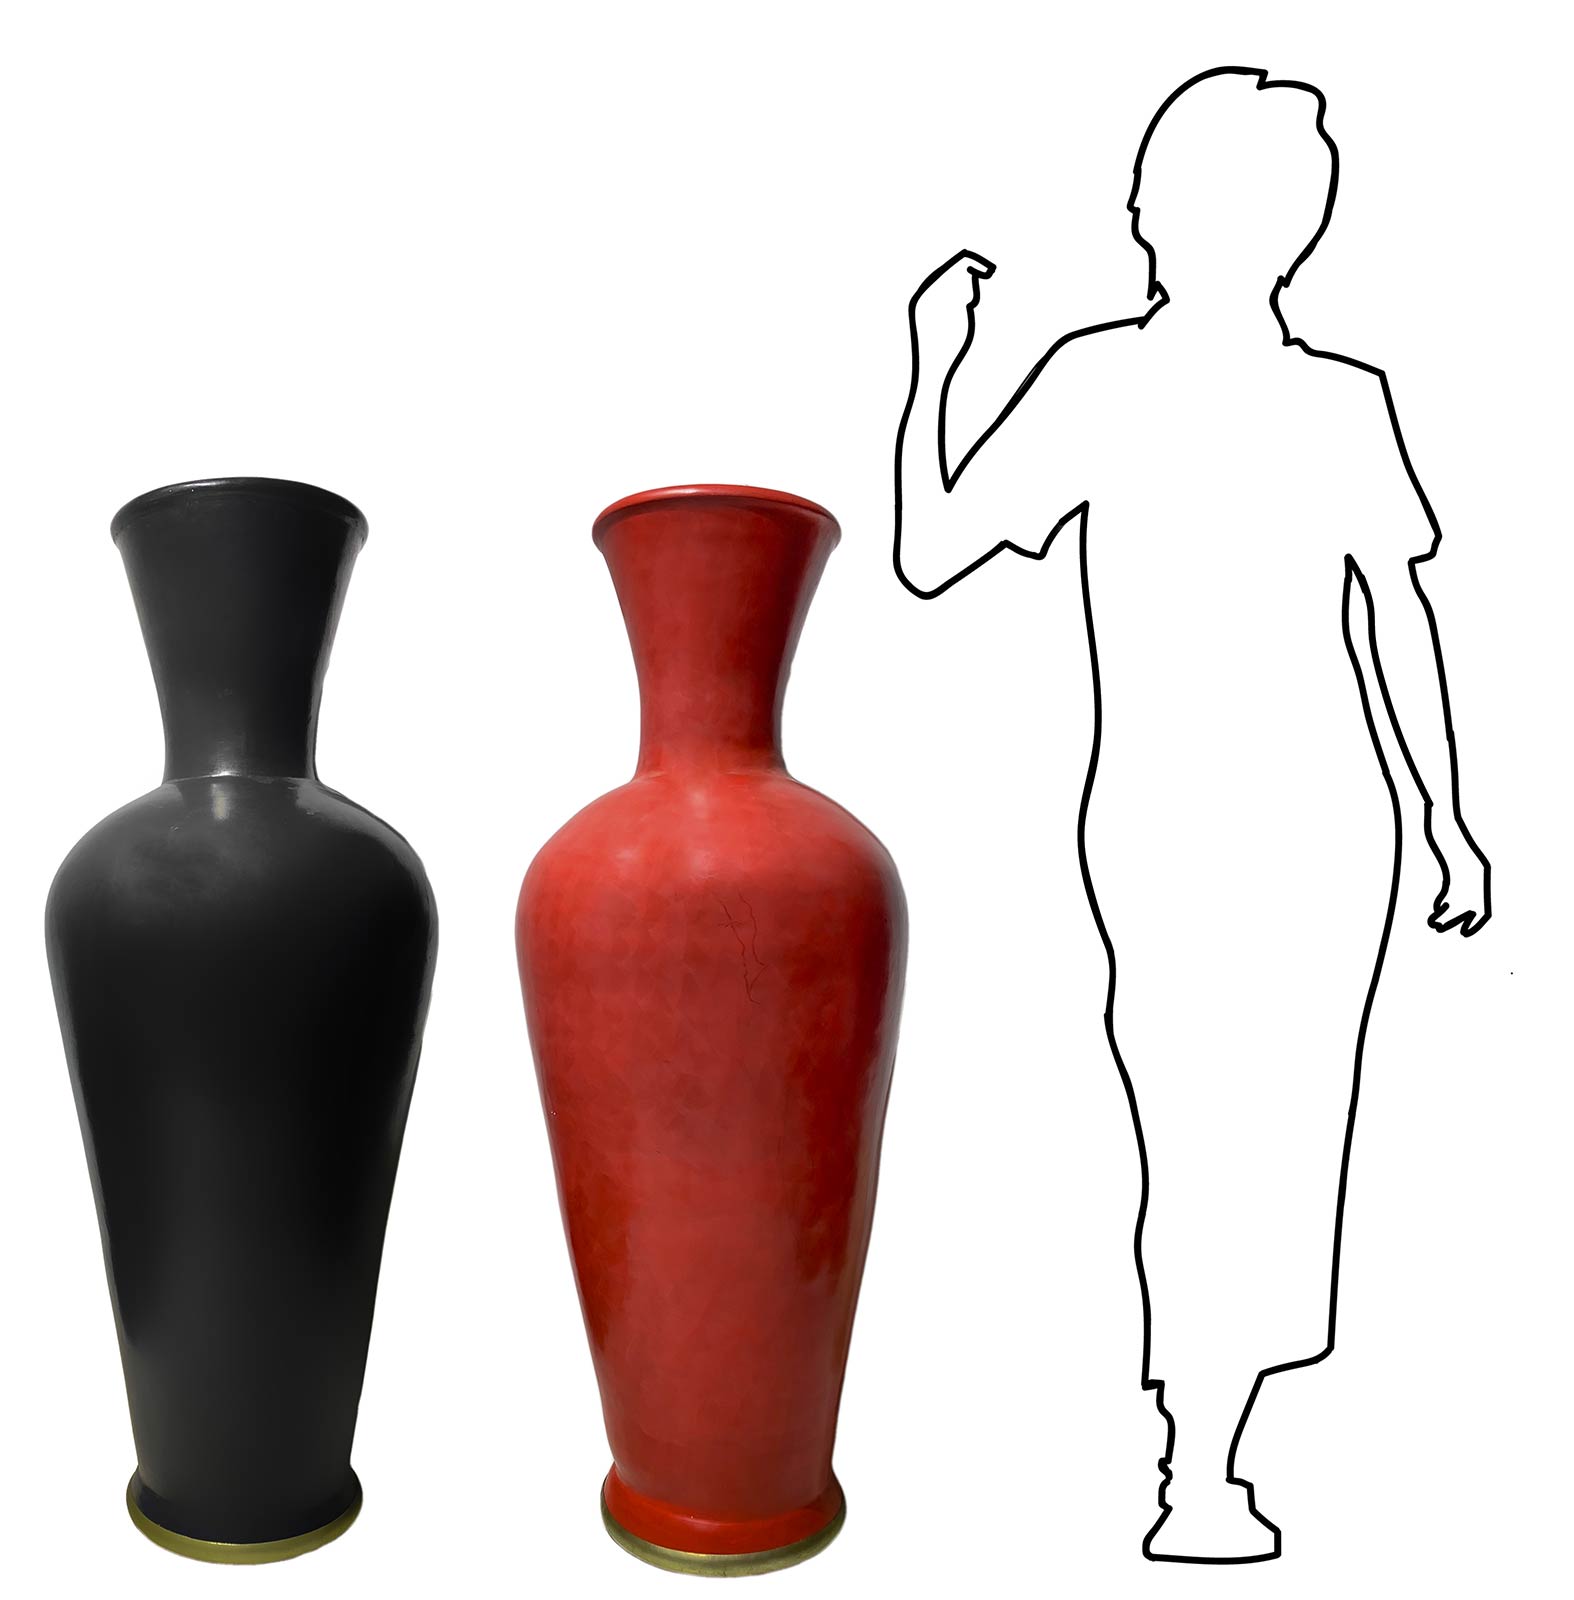 Pair of large baluster vases in black clay and red apple, Italian production in the style of